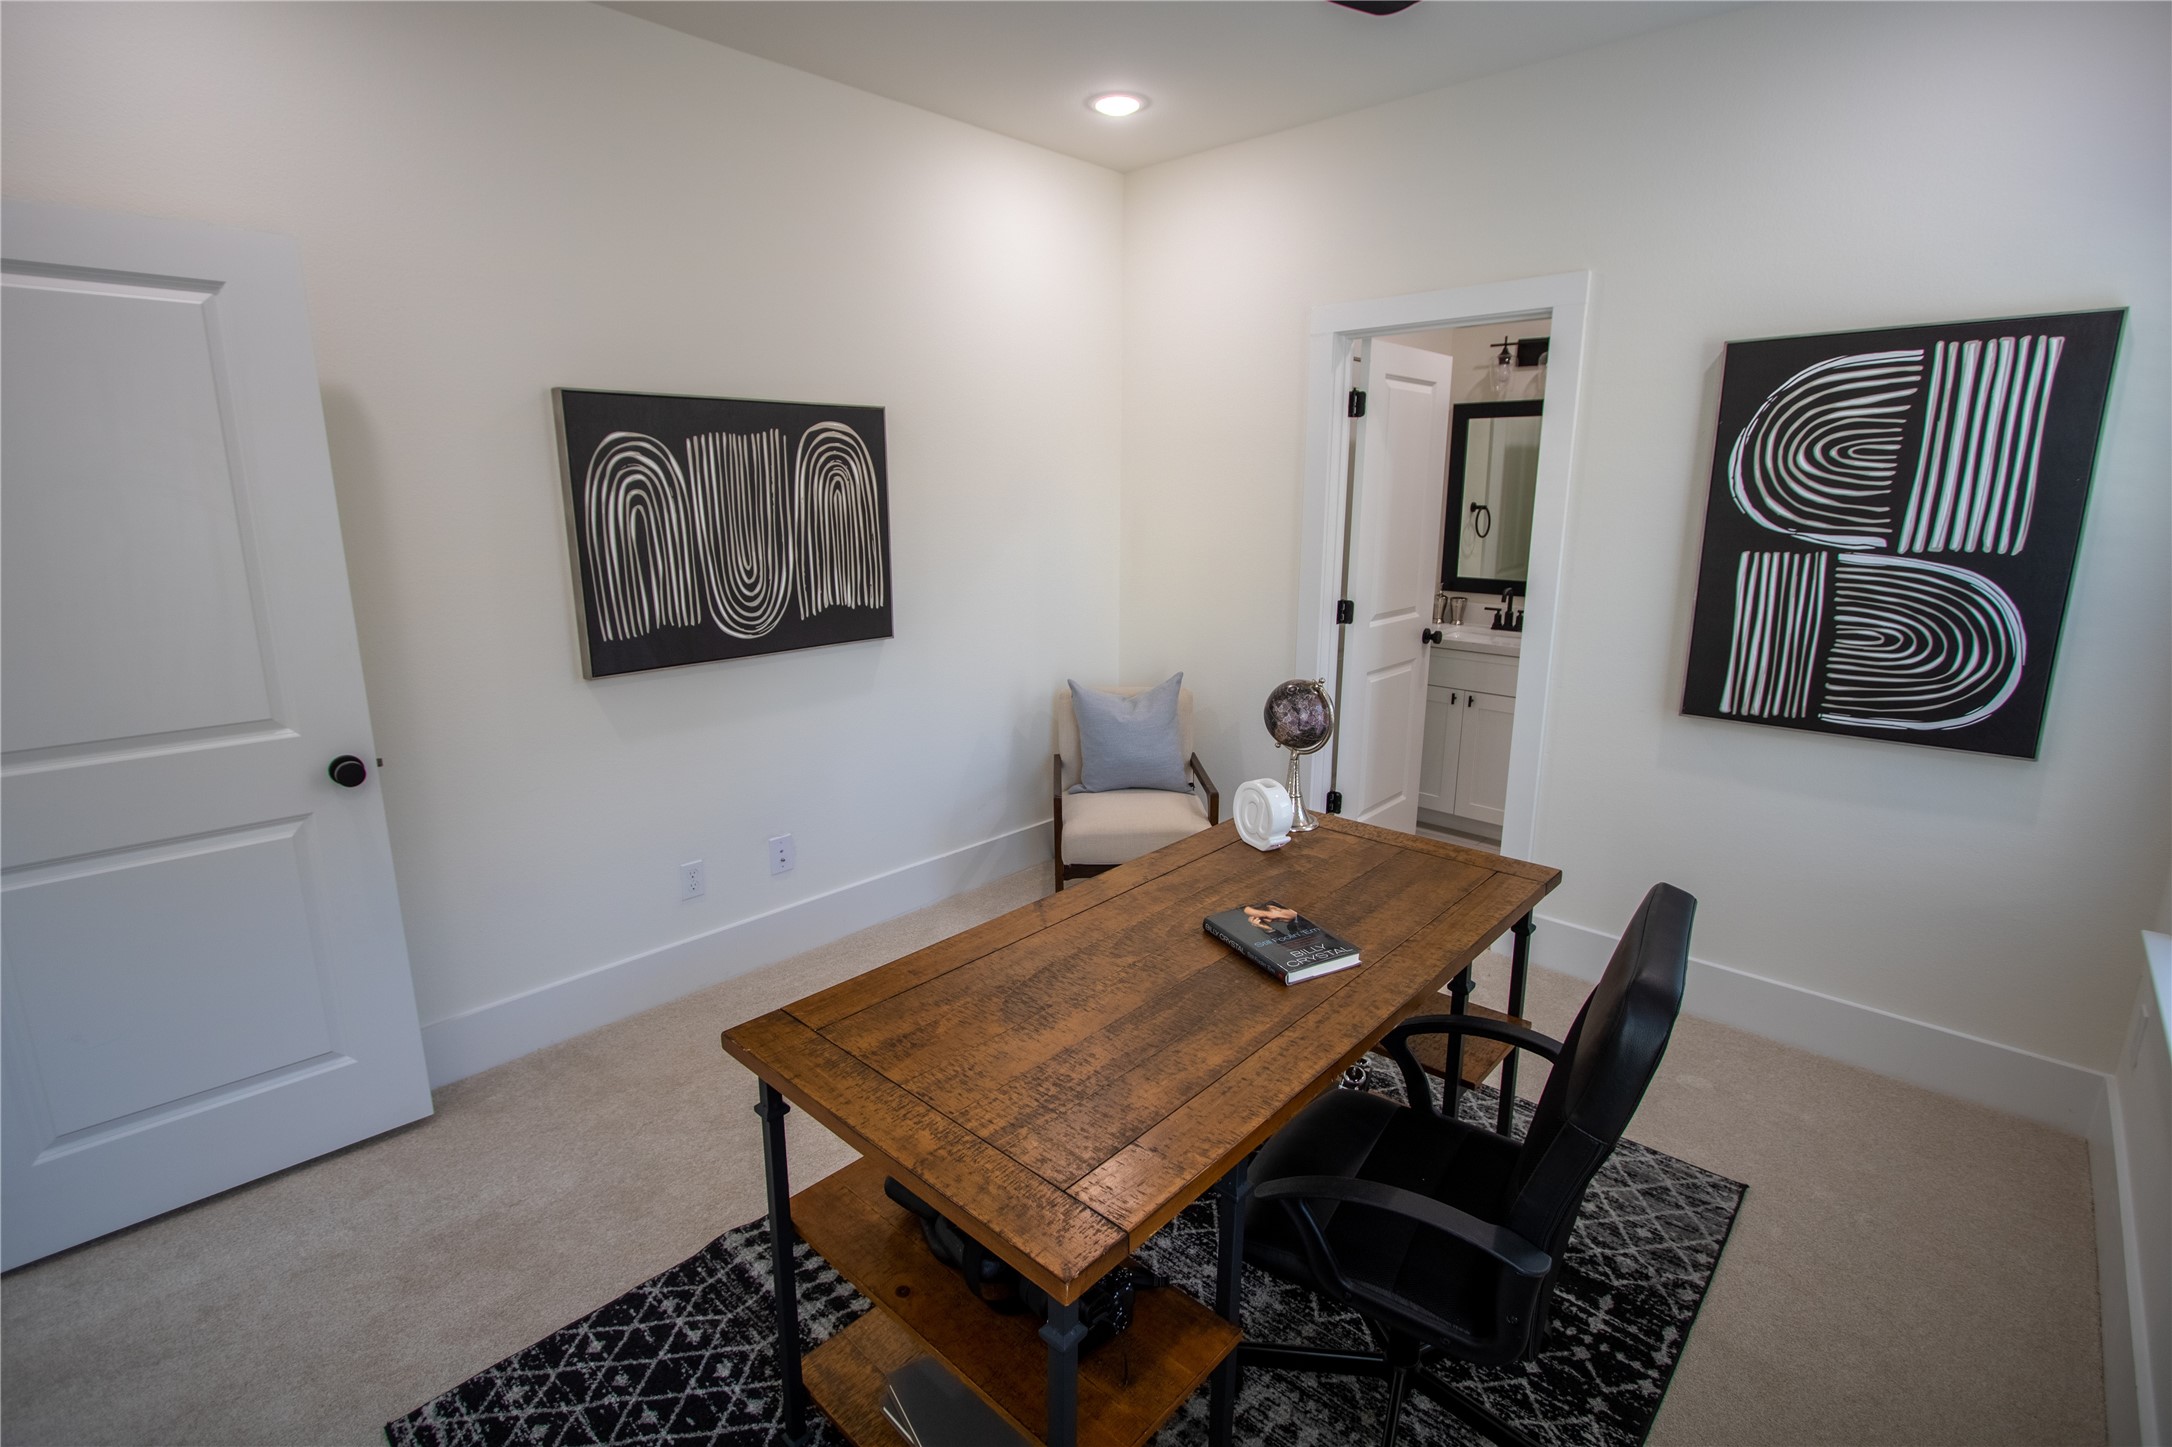 These are pictures of our furnished model home(1408 #C), which is the same floor plan.